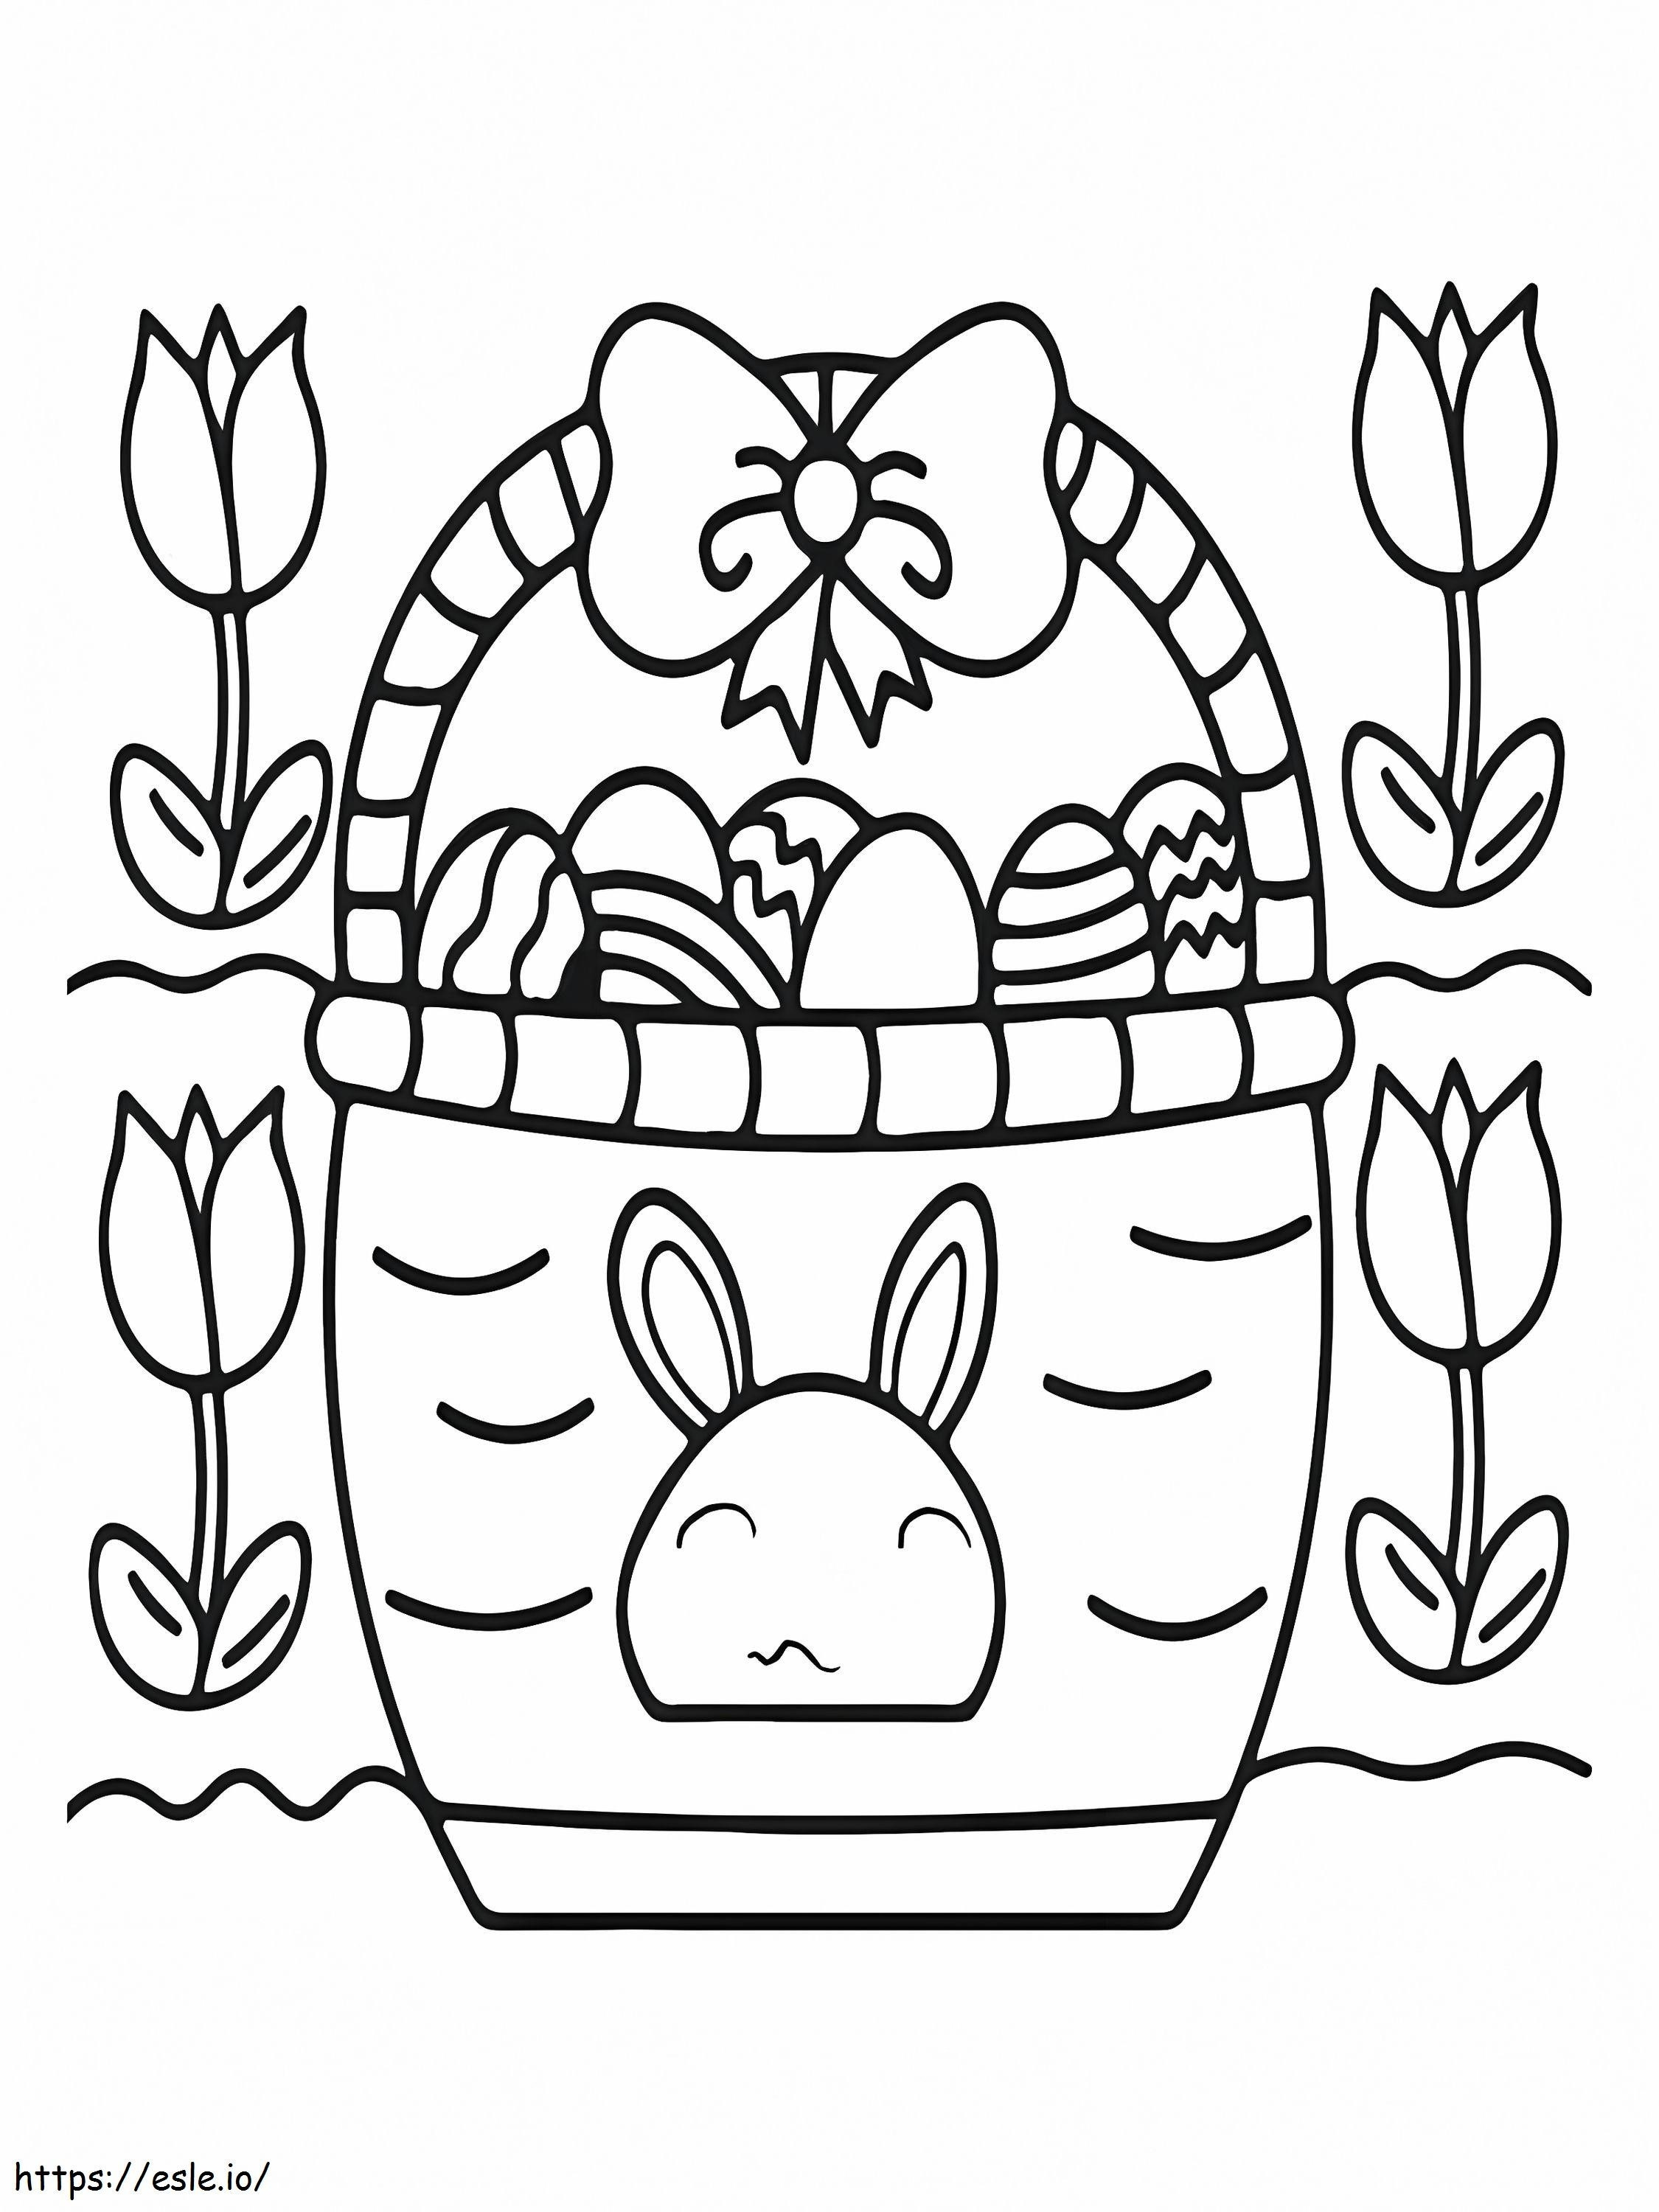 Basket Full Of Easter Eggs coloring page